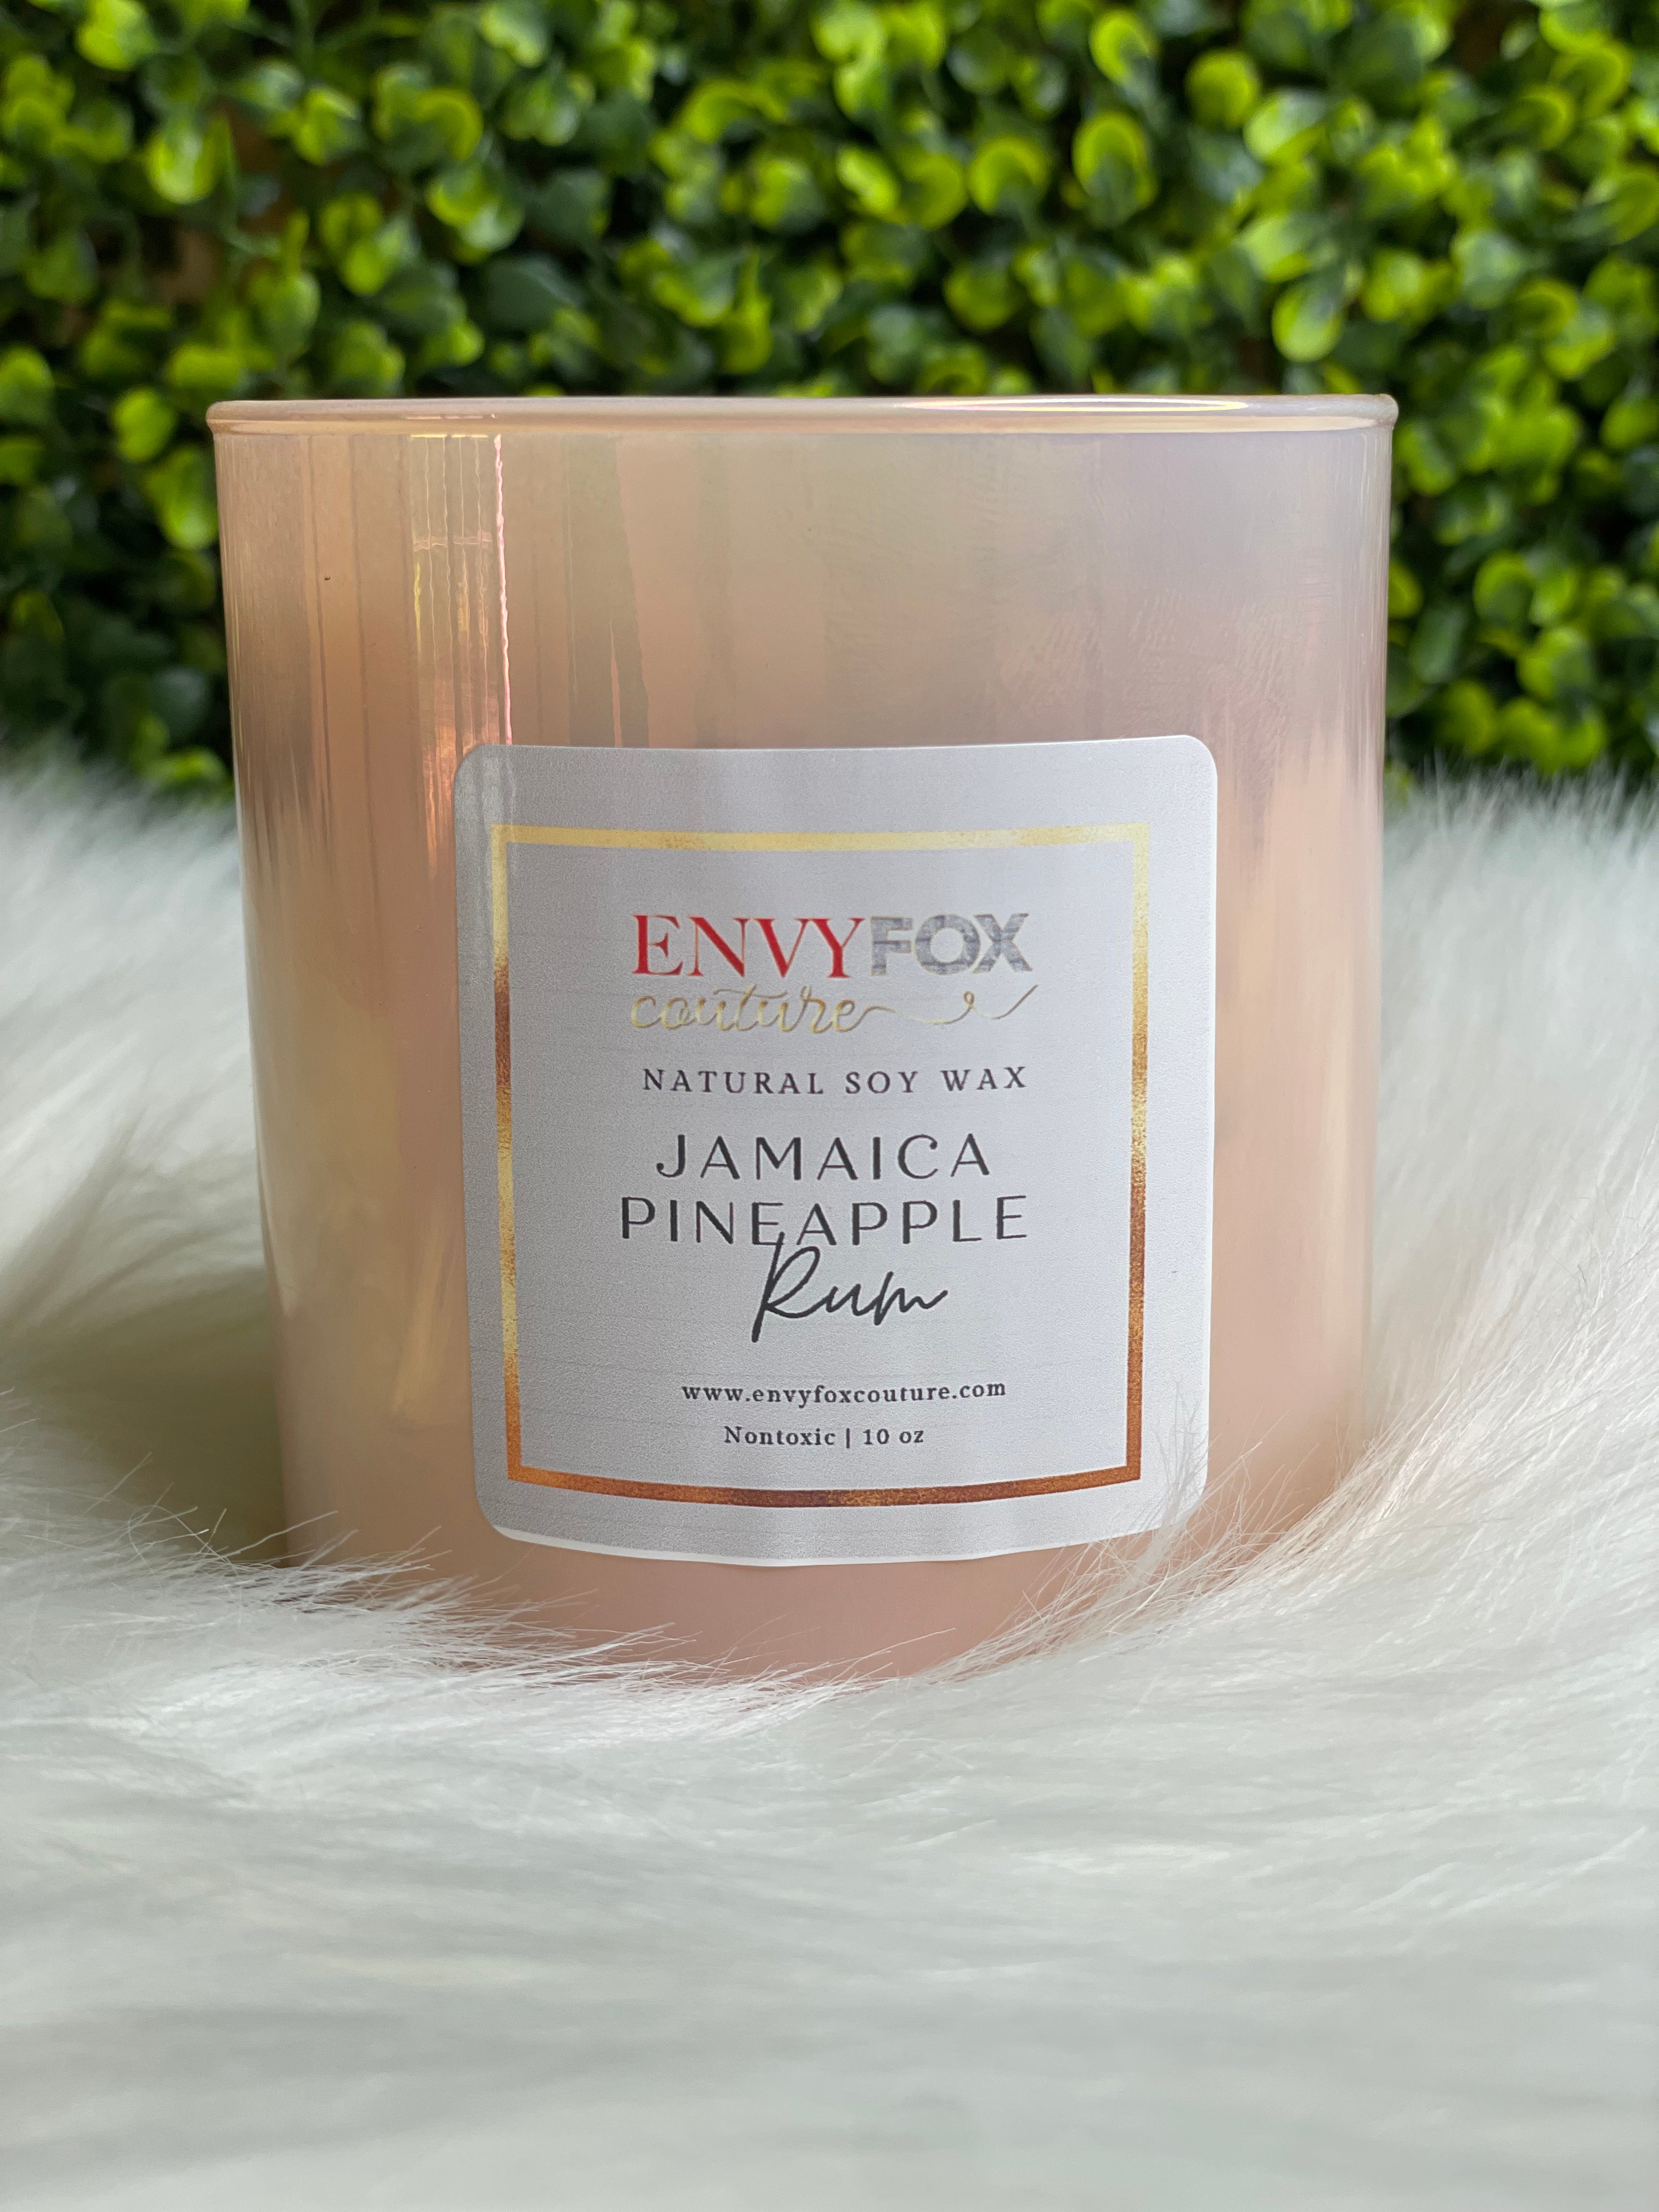 Jamaica Pineapple Rum 10 oz Natural Soy Wax Candle